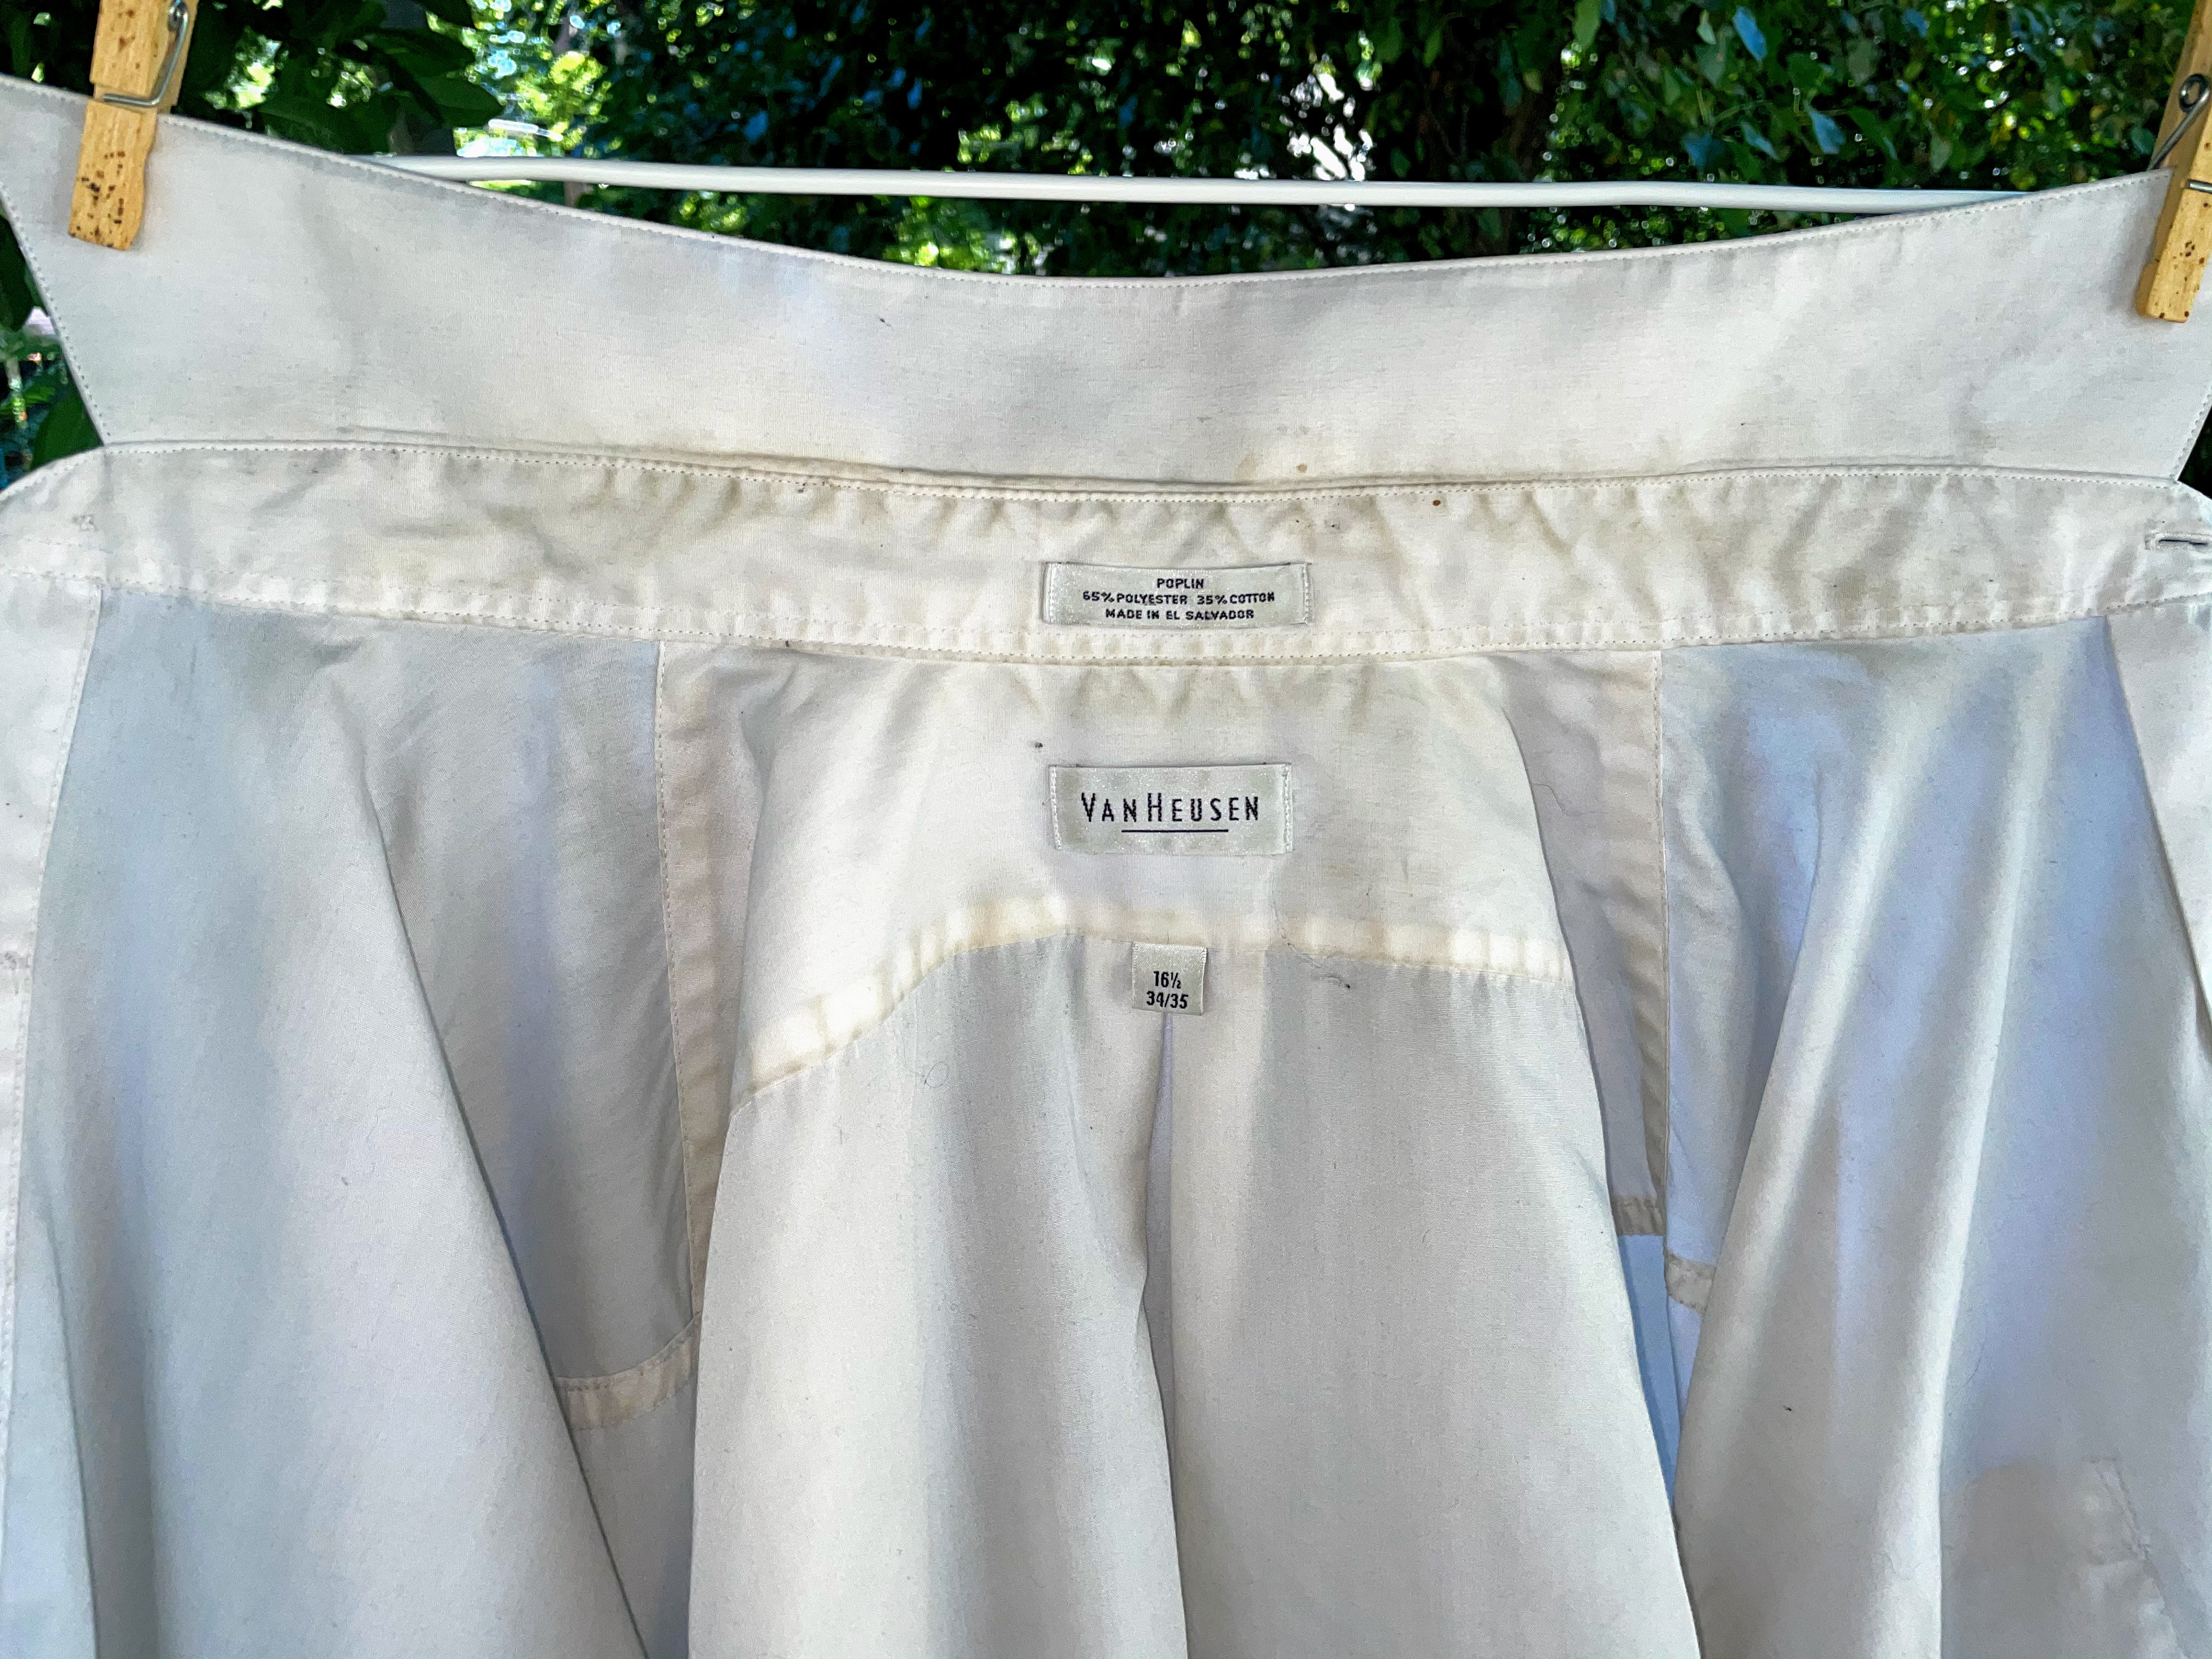 Photo of dirty white shirt hanging on clothesline